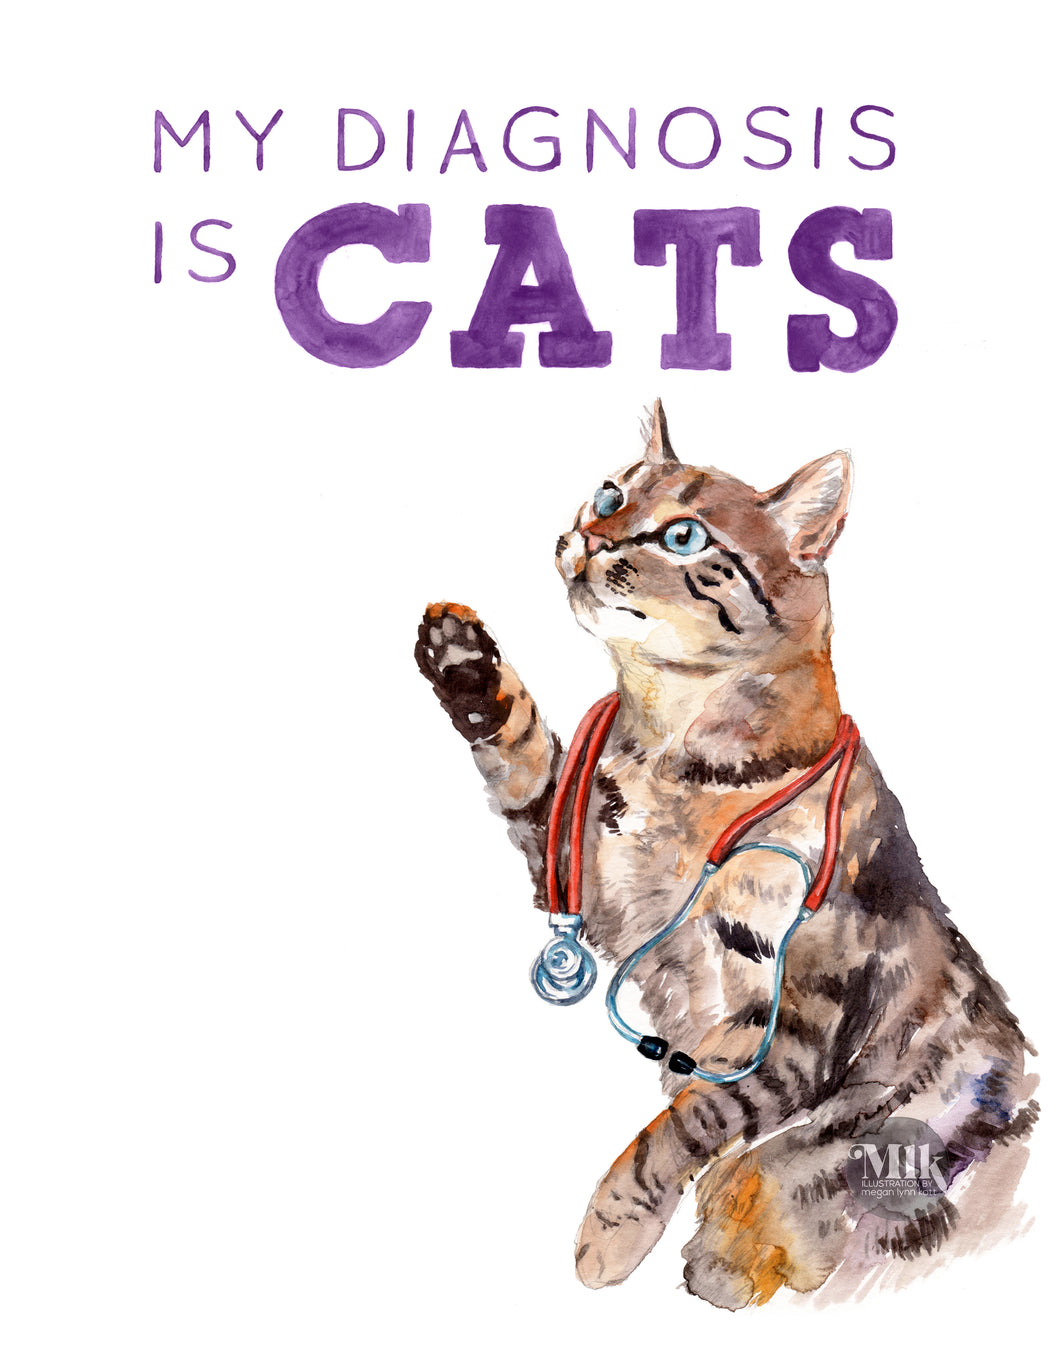 My Diagnosis is Cats - 11x14